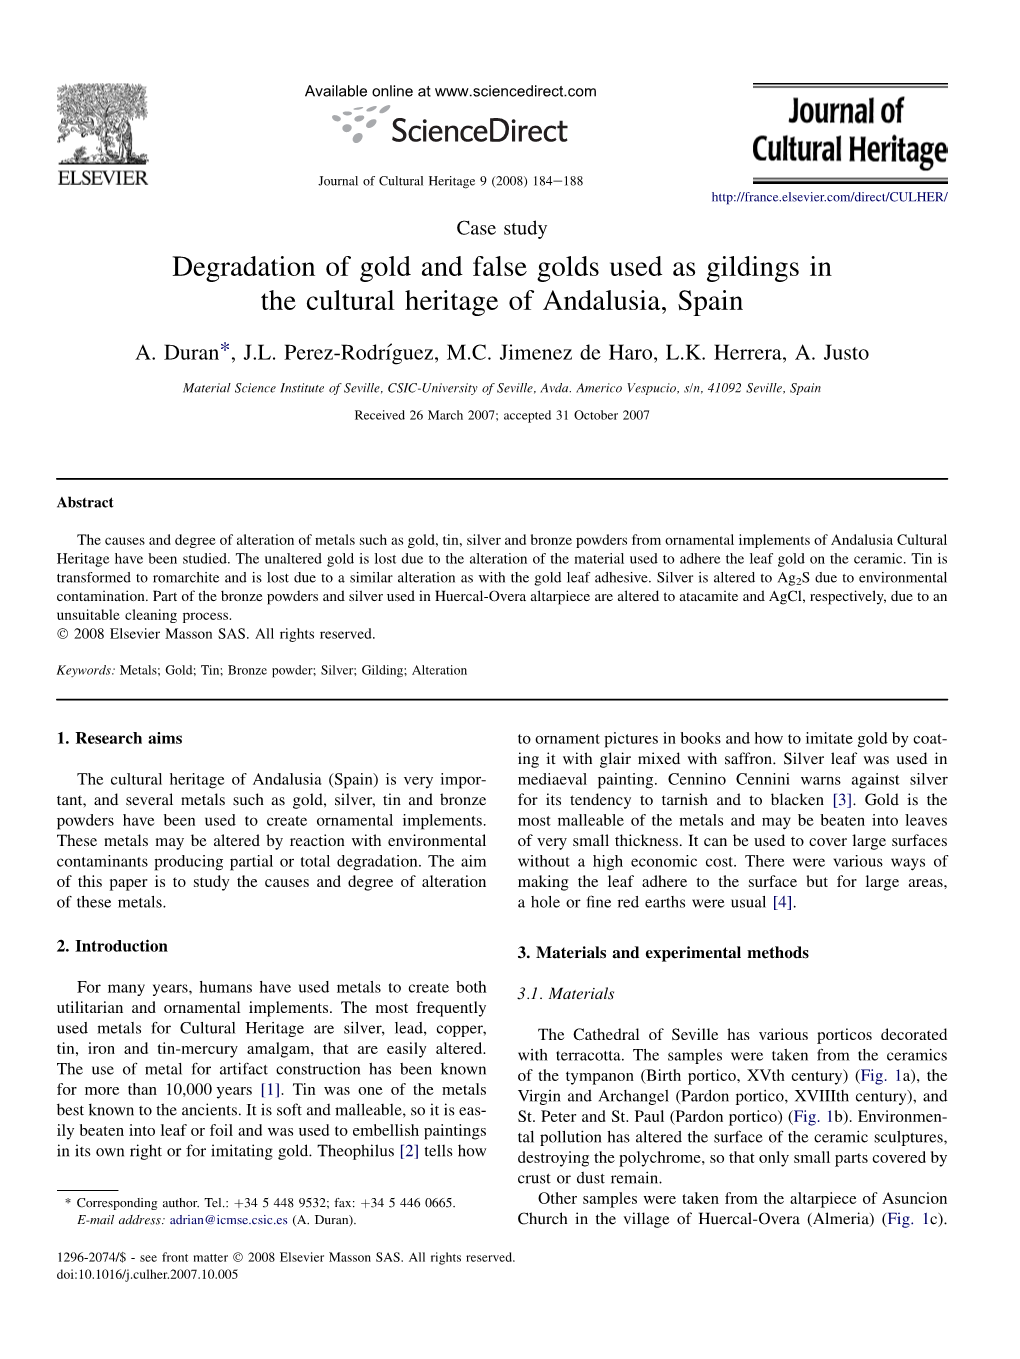 Degradation of Gold and False Golds Used As Gildings in the Cultural Heritage of Andalusia, Spain